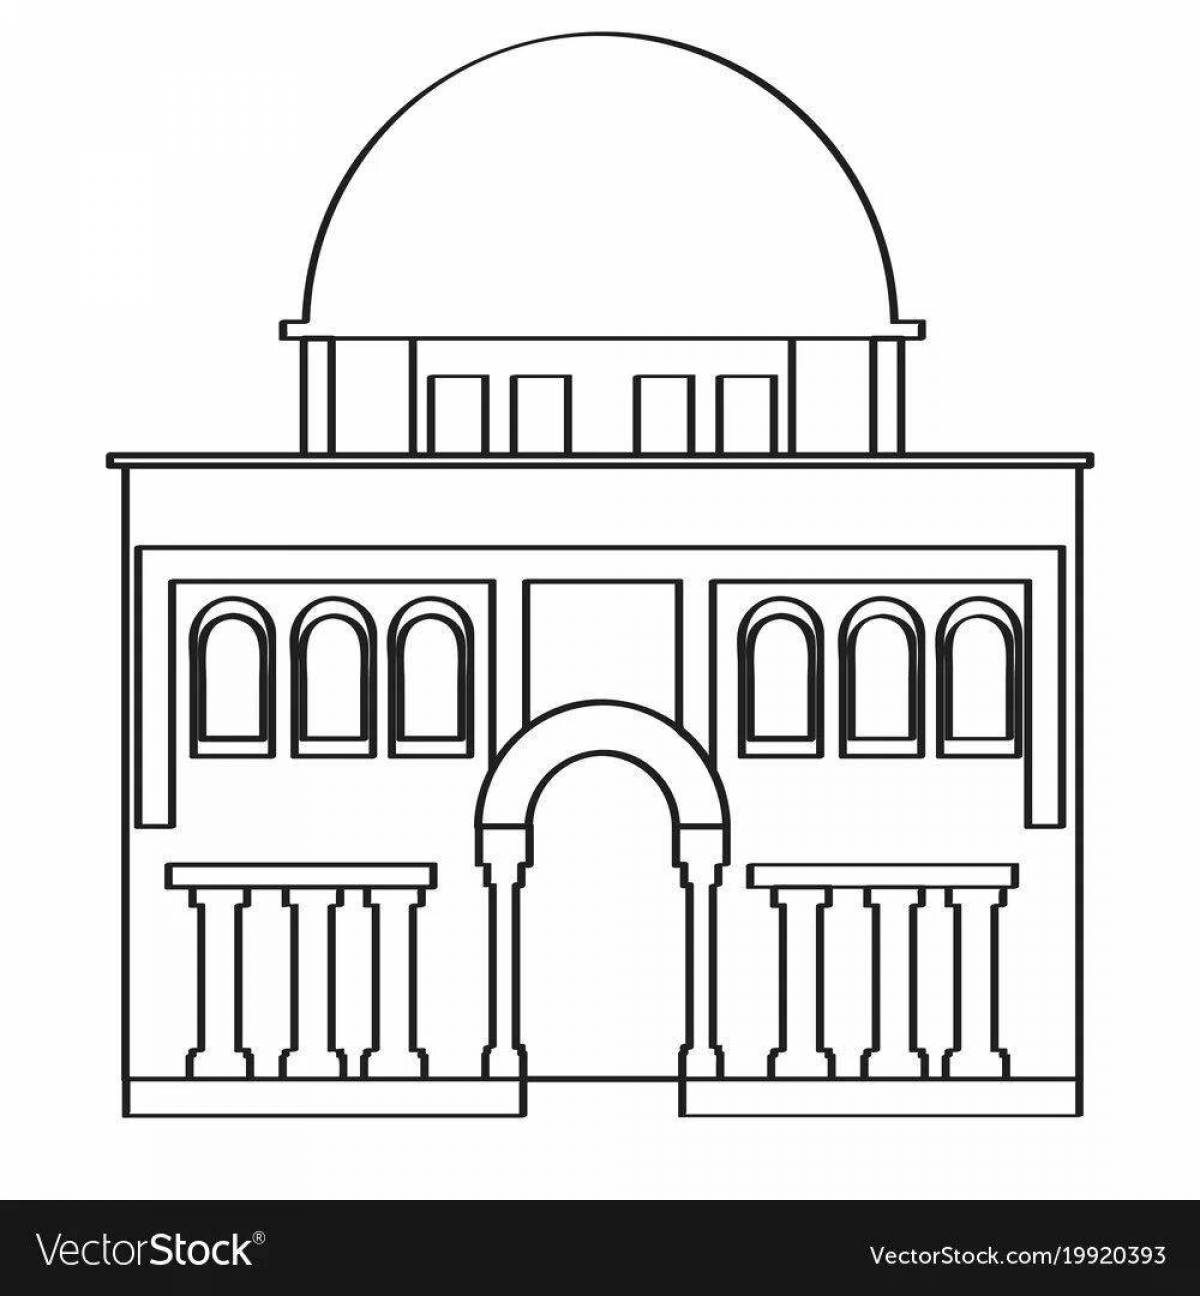 Exquisite synagogue coloring page